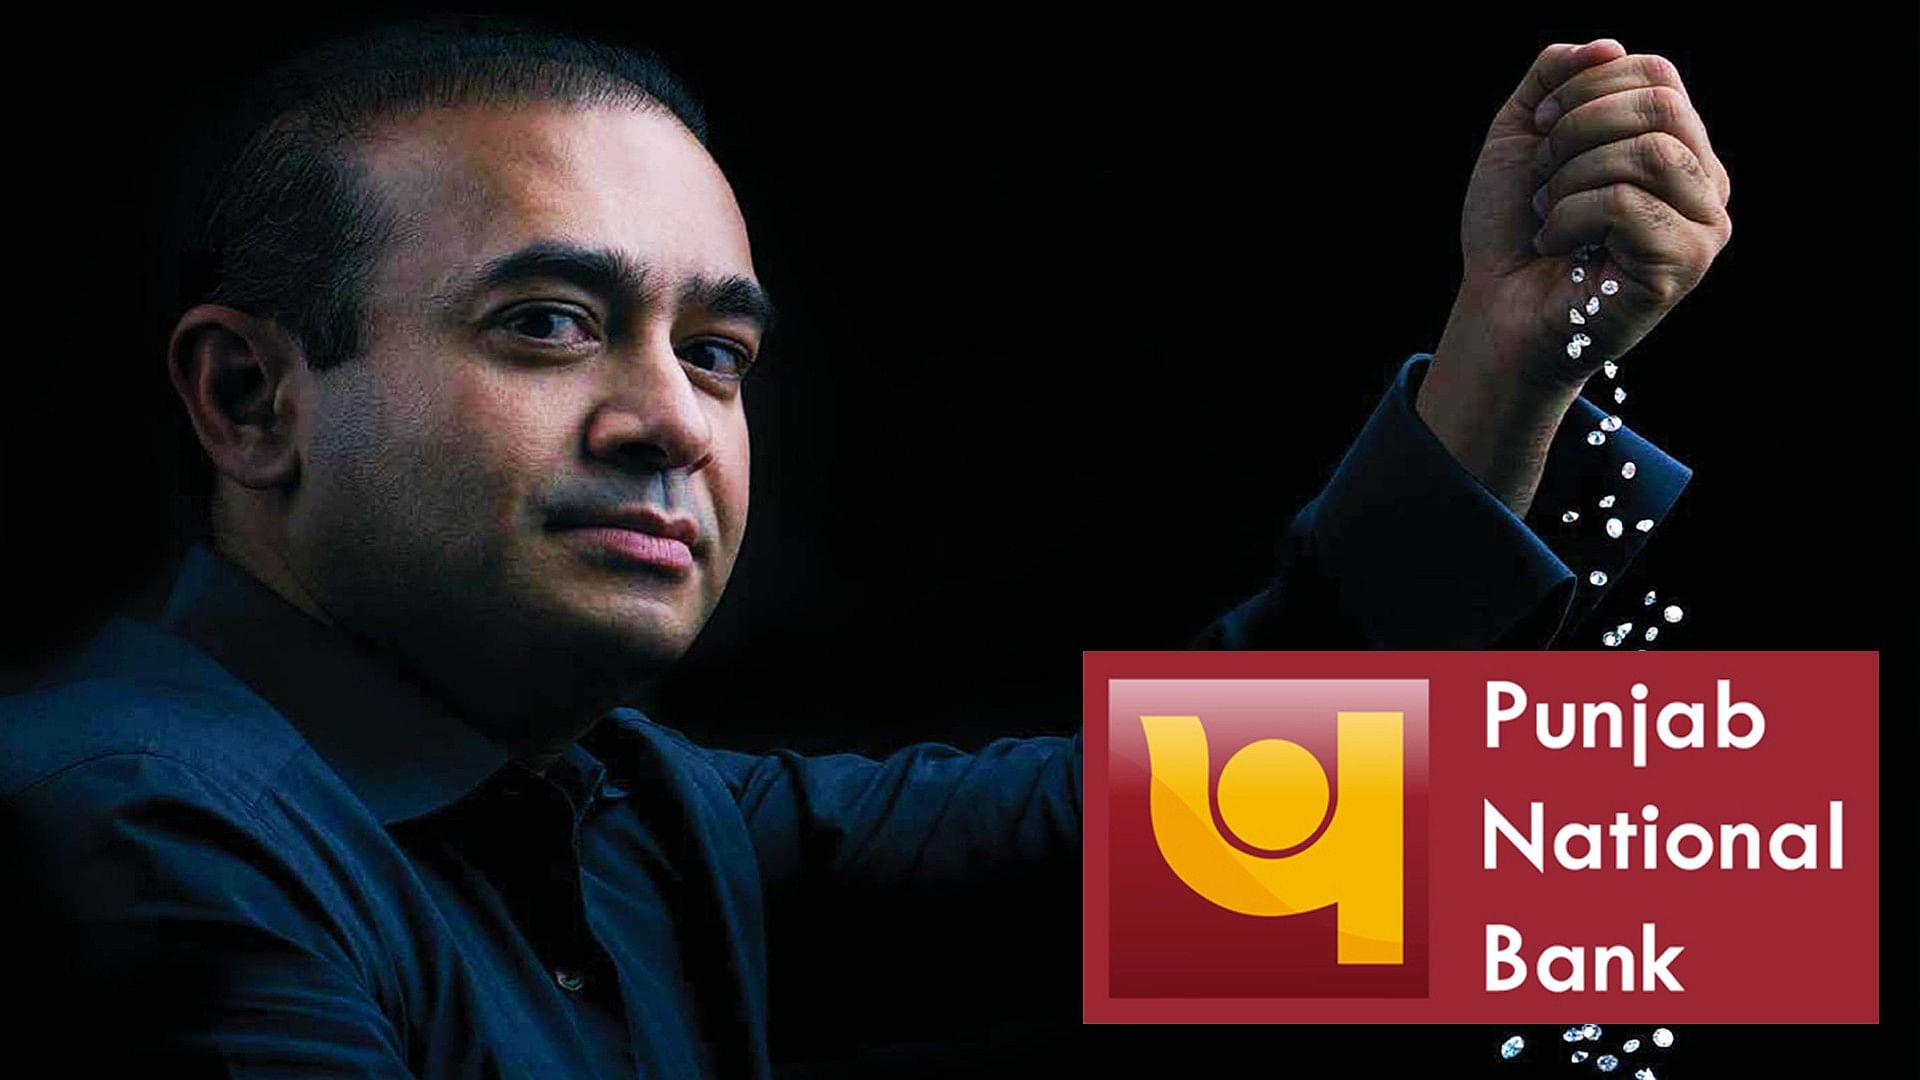 Nirav Modi allegedly wrote a letter to Punjab National Bank which contains some interesting elements.